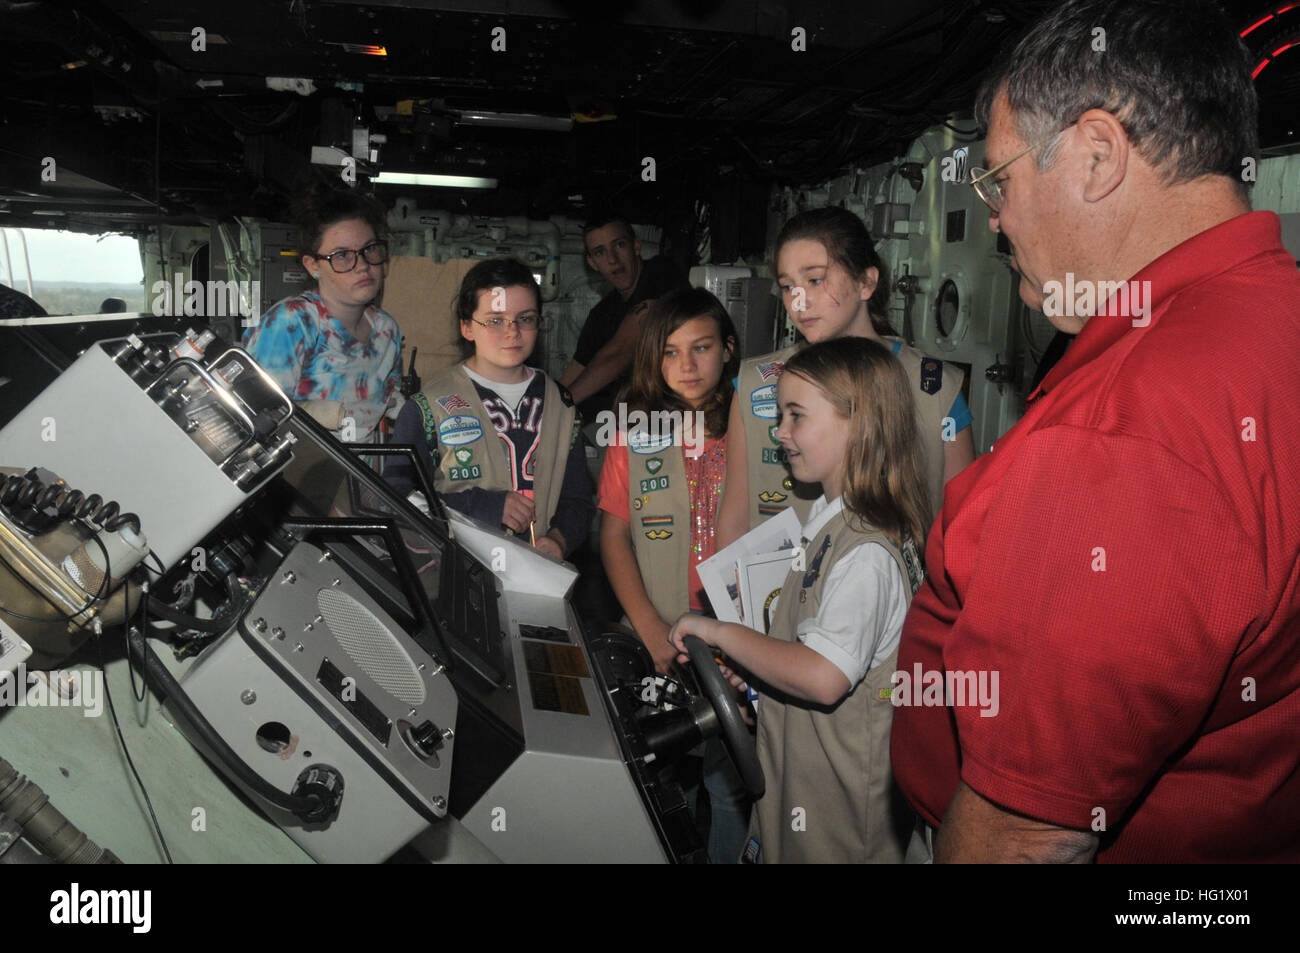 131223-N-GC472-258 MAYPORT, FLA (December 23, 2013) Sailors aboard amphibious transport dock ship USS New York (LPD 21) gives a tour of the ship to Girl Scouts from the Girl Scouts of the USA Gainesville Chapter. New York shifted homeport to Naval Station Mayport, Fla., as part of a larger move of an amphibious ready group homeport change in support of strategic maritime dispersal. (U.S. Navy photo by Mass Communication Specialist 3rd class Angus Beckles/Released) USS New York visit 131223-N-GC472-258 Stock Photo